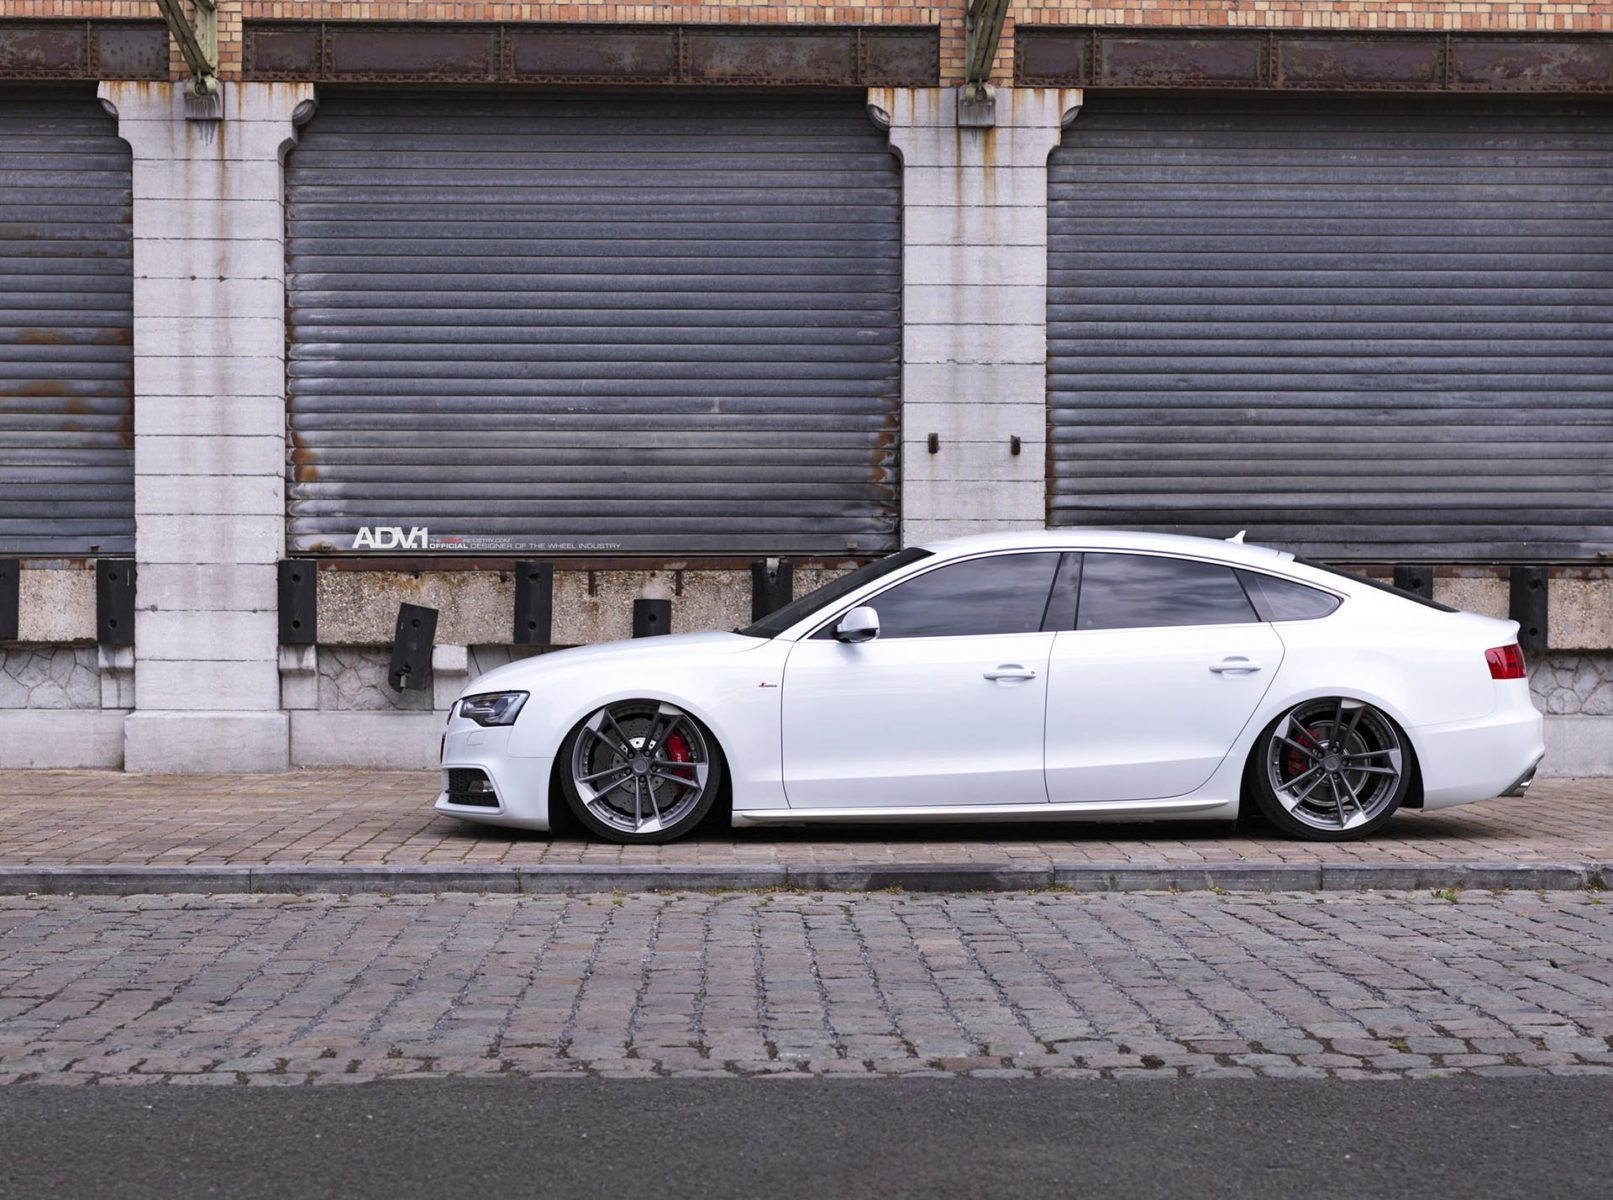 AUDI A5 SPORTBACK ADV RSQ1 M.V2 SL FORGED WHEELS Buy with delivery